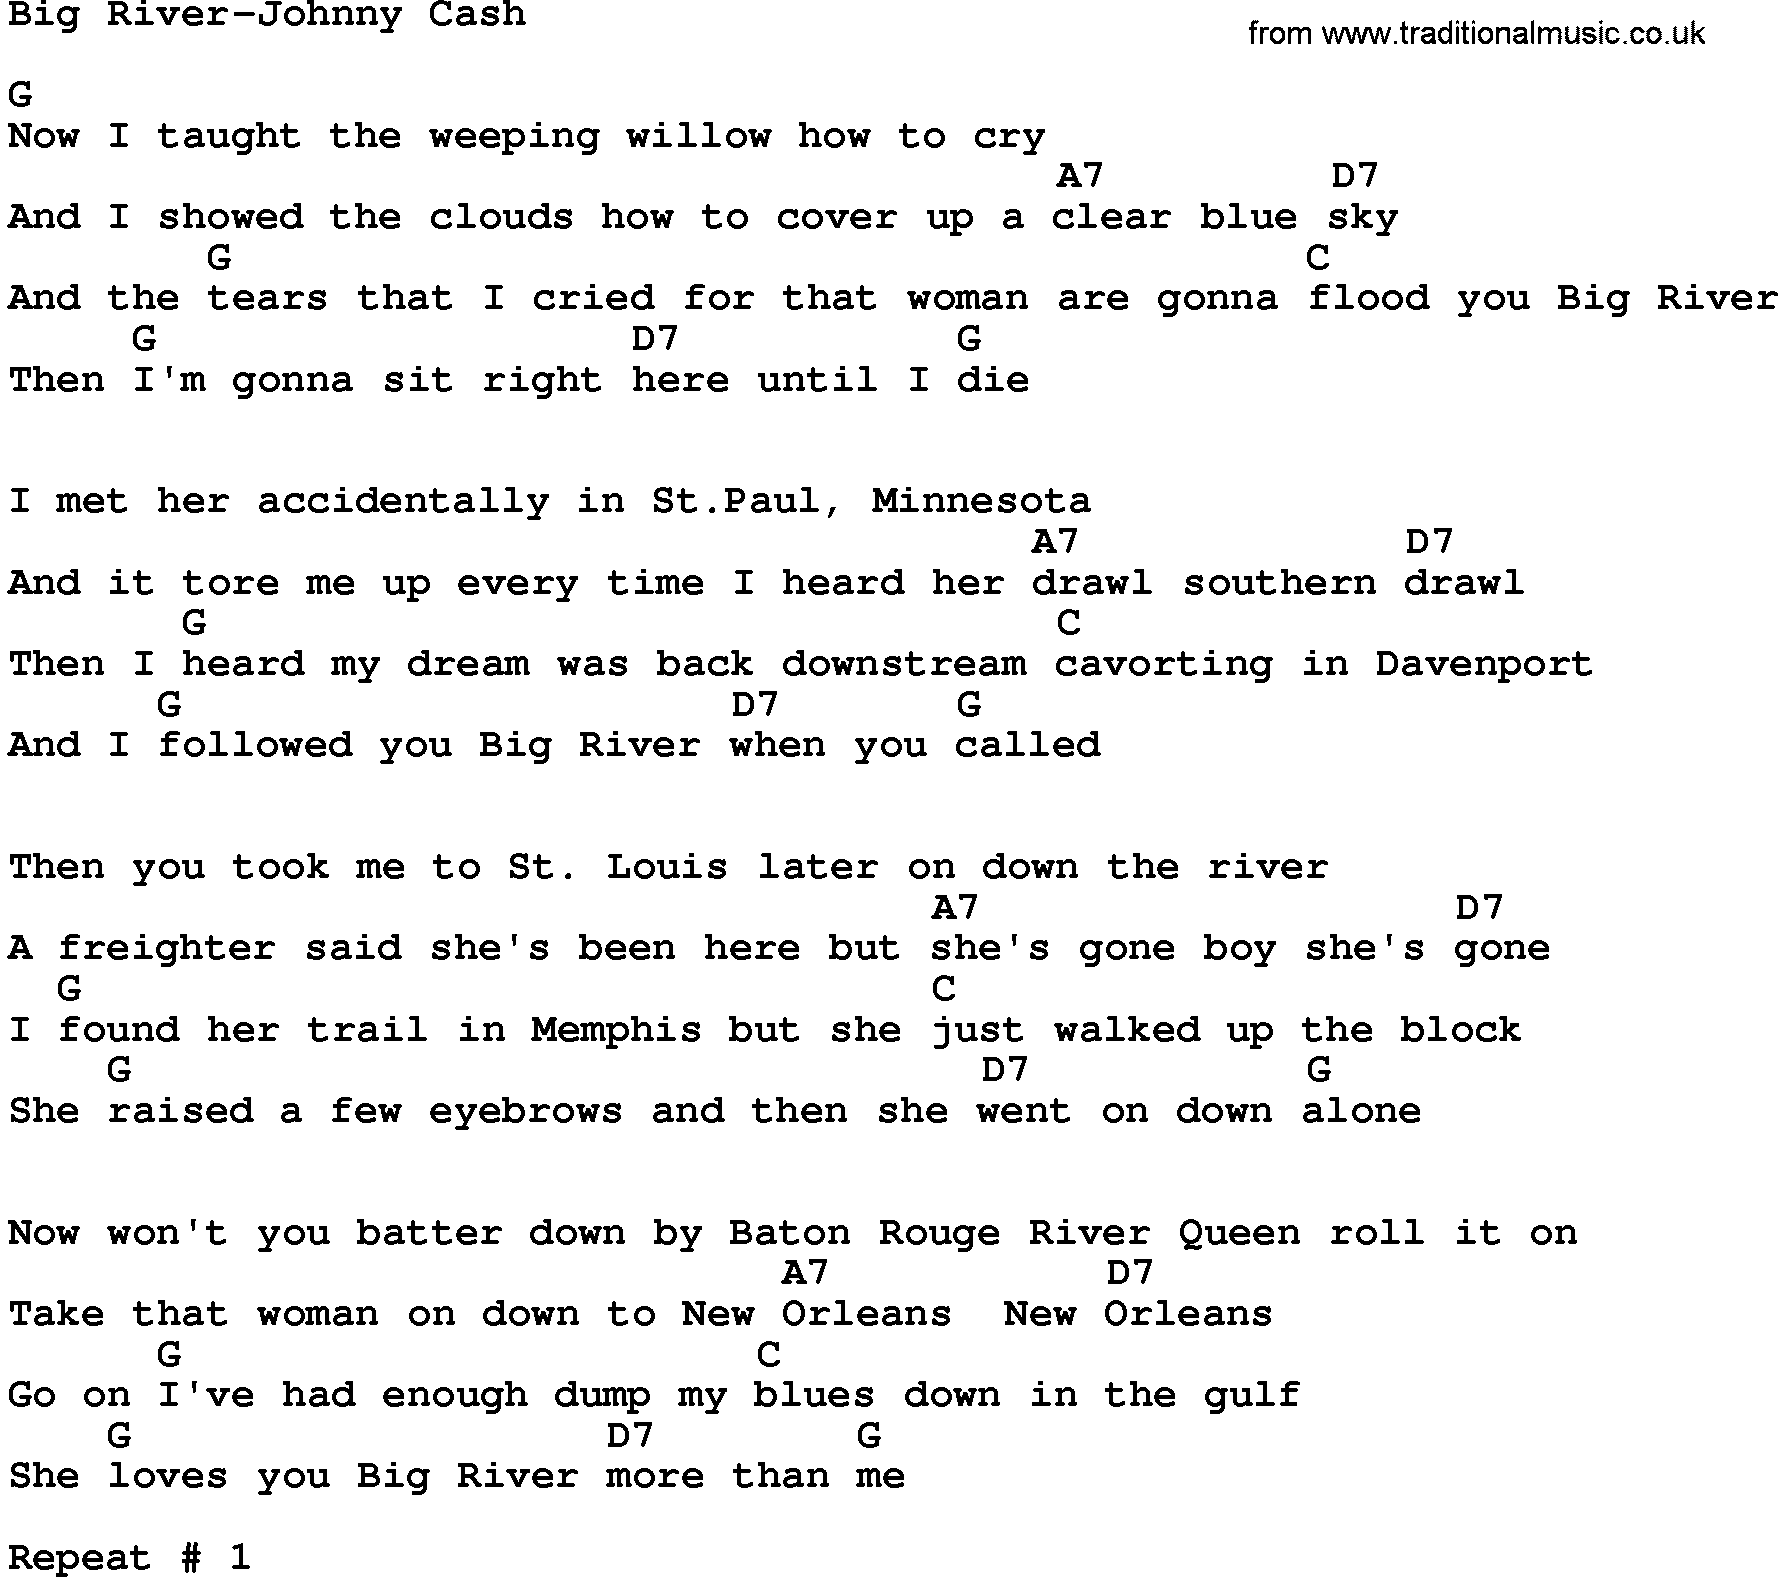 Country music song: Big River-Johnny Cash lyrics and chords